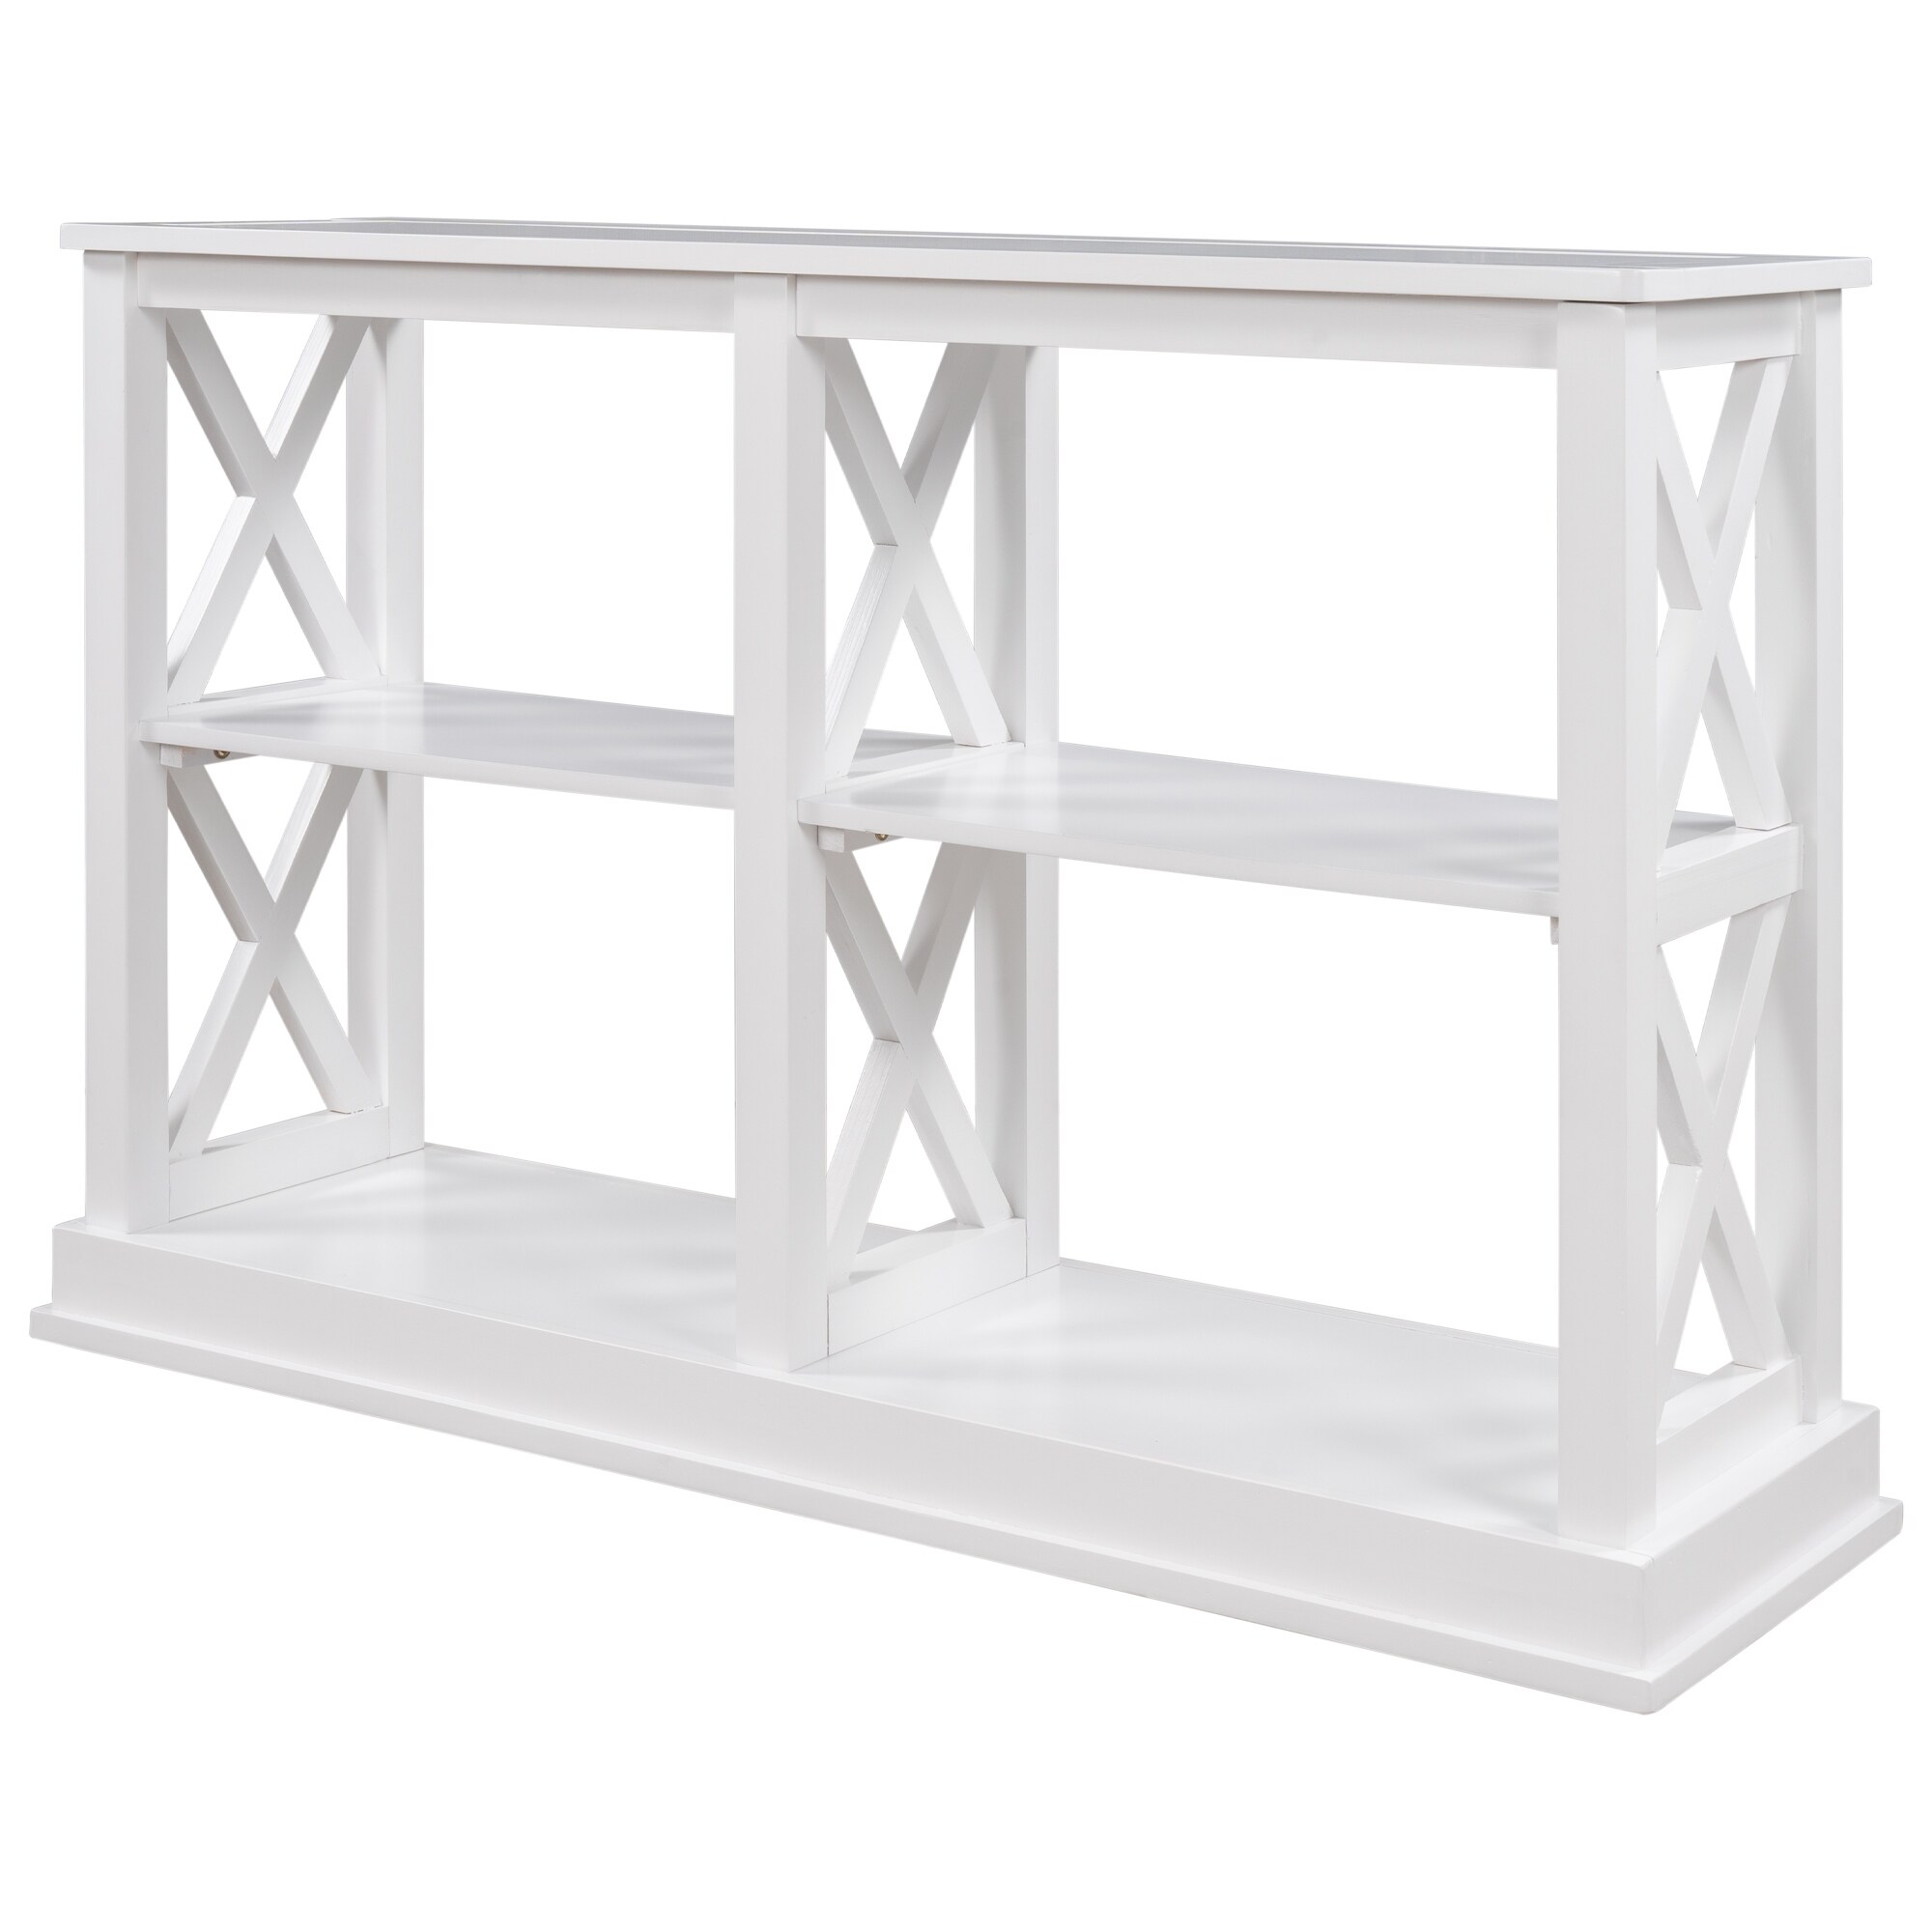 Tracy 46 inch Console Table with 3-Tier Open Storage in White - 46.5 inchL x 13.2 inchW x 31.7 inchH